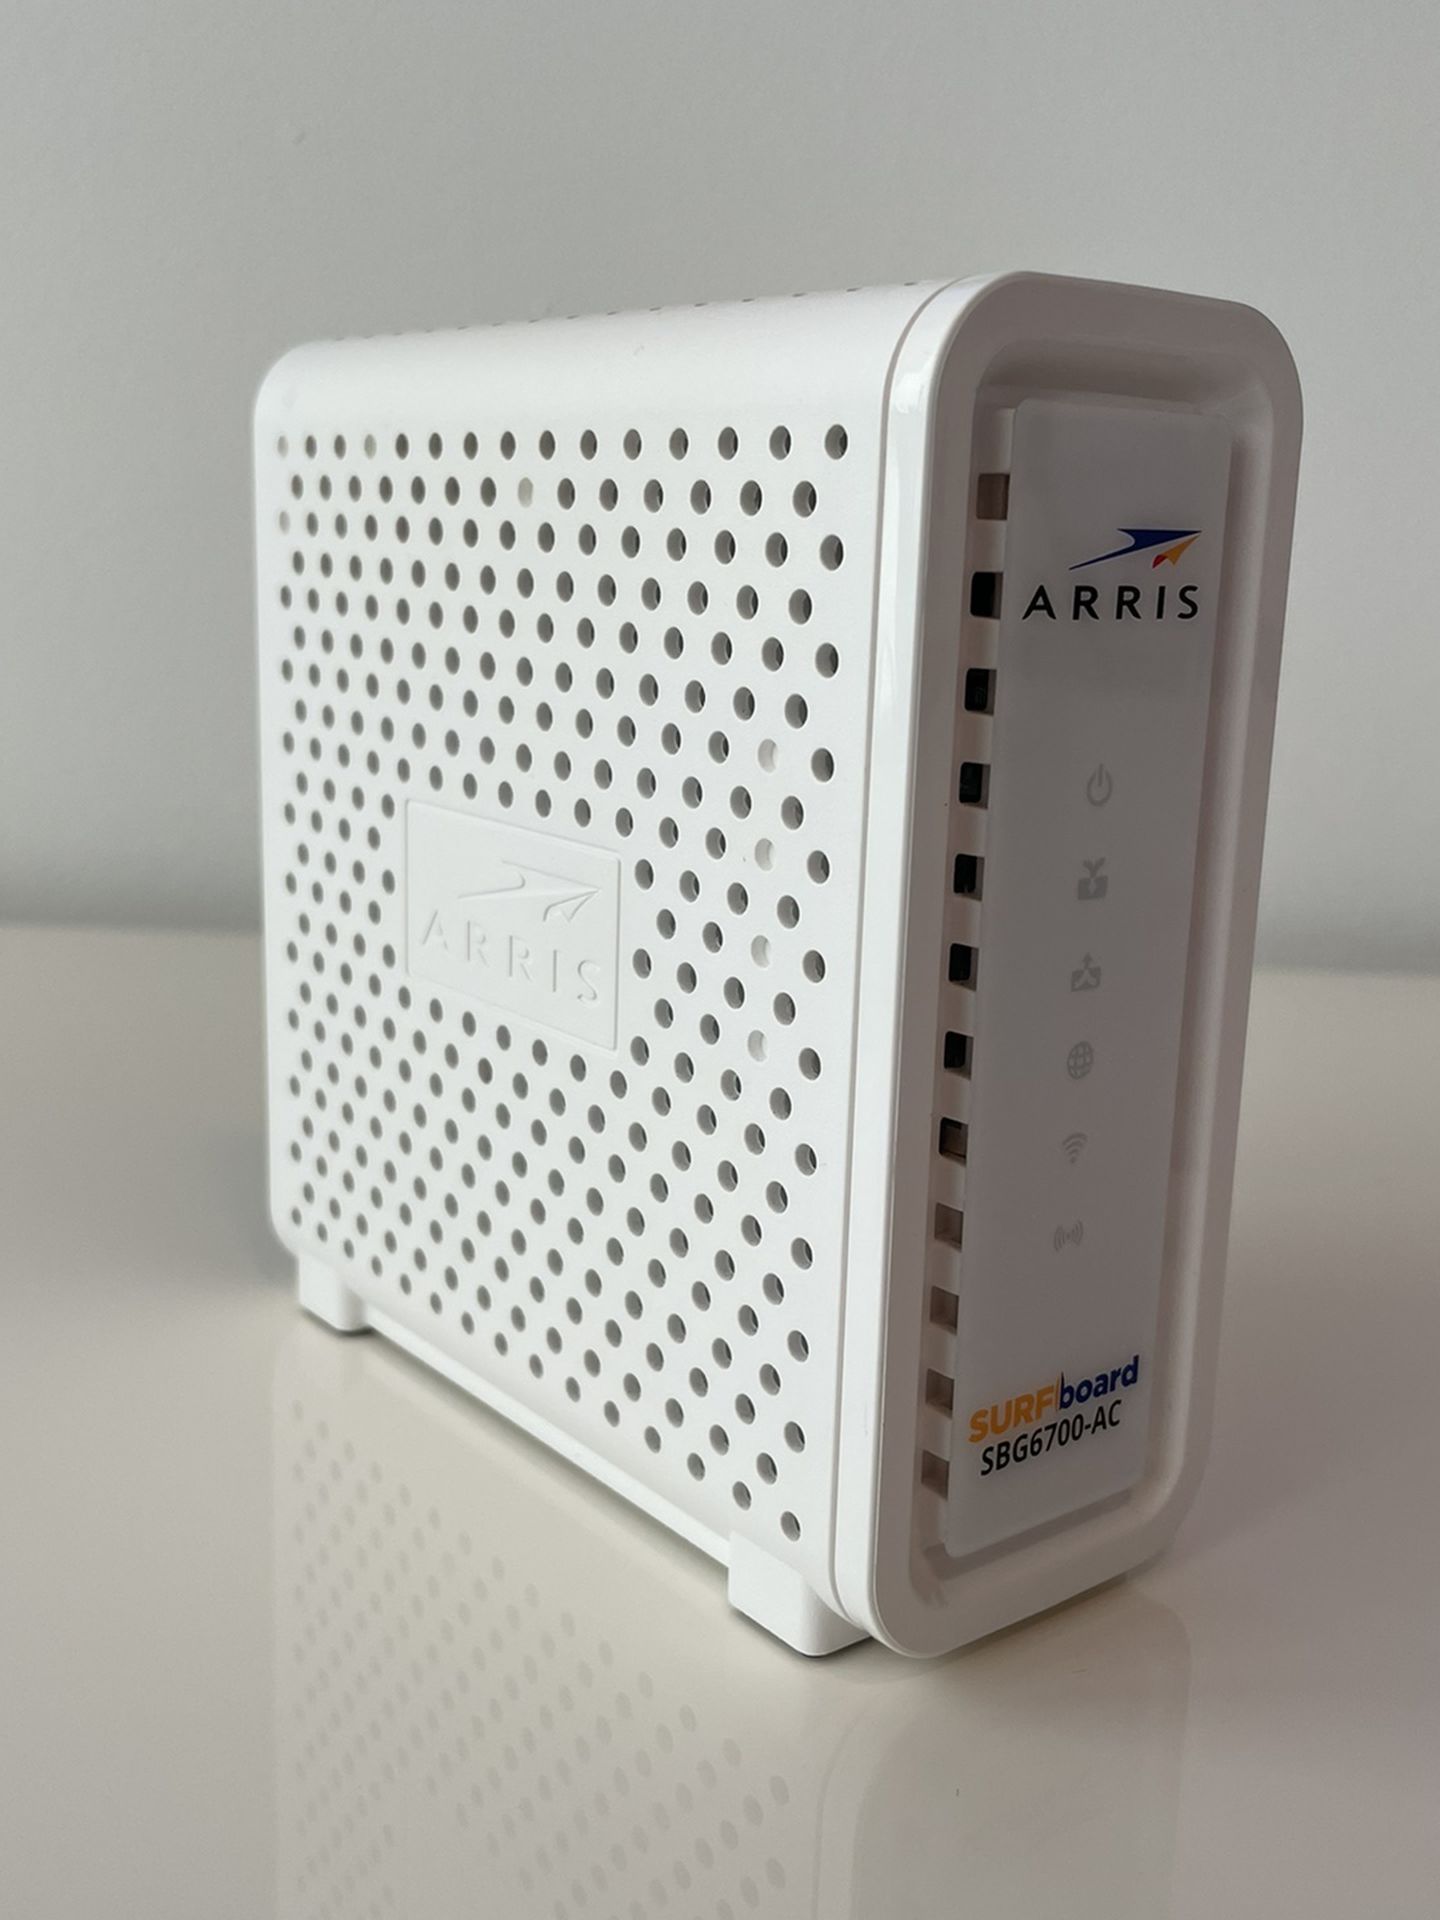 ARRIS Surfboard SBG6700-AC cable modem for Comcast Xfinity, Spectrum, Cox and more